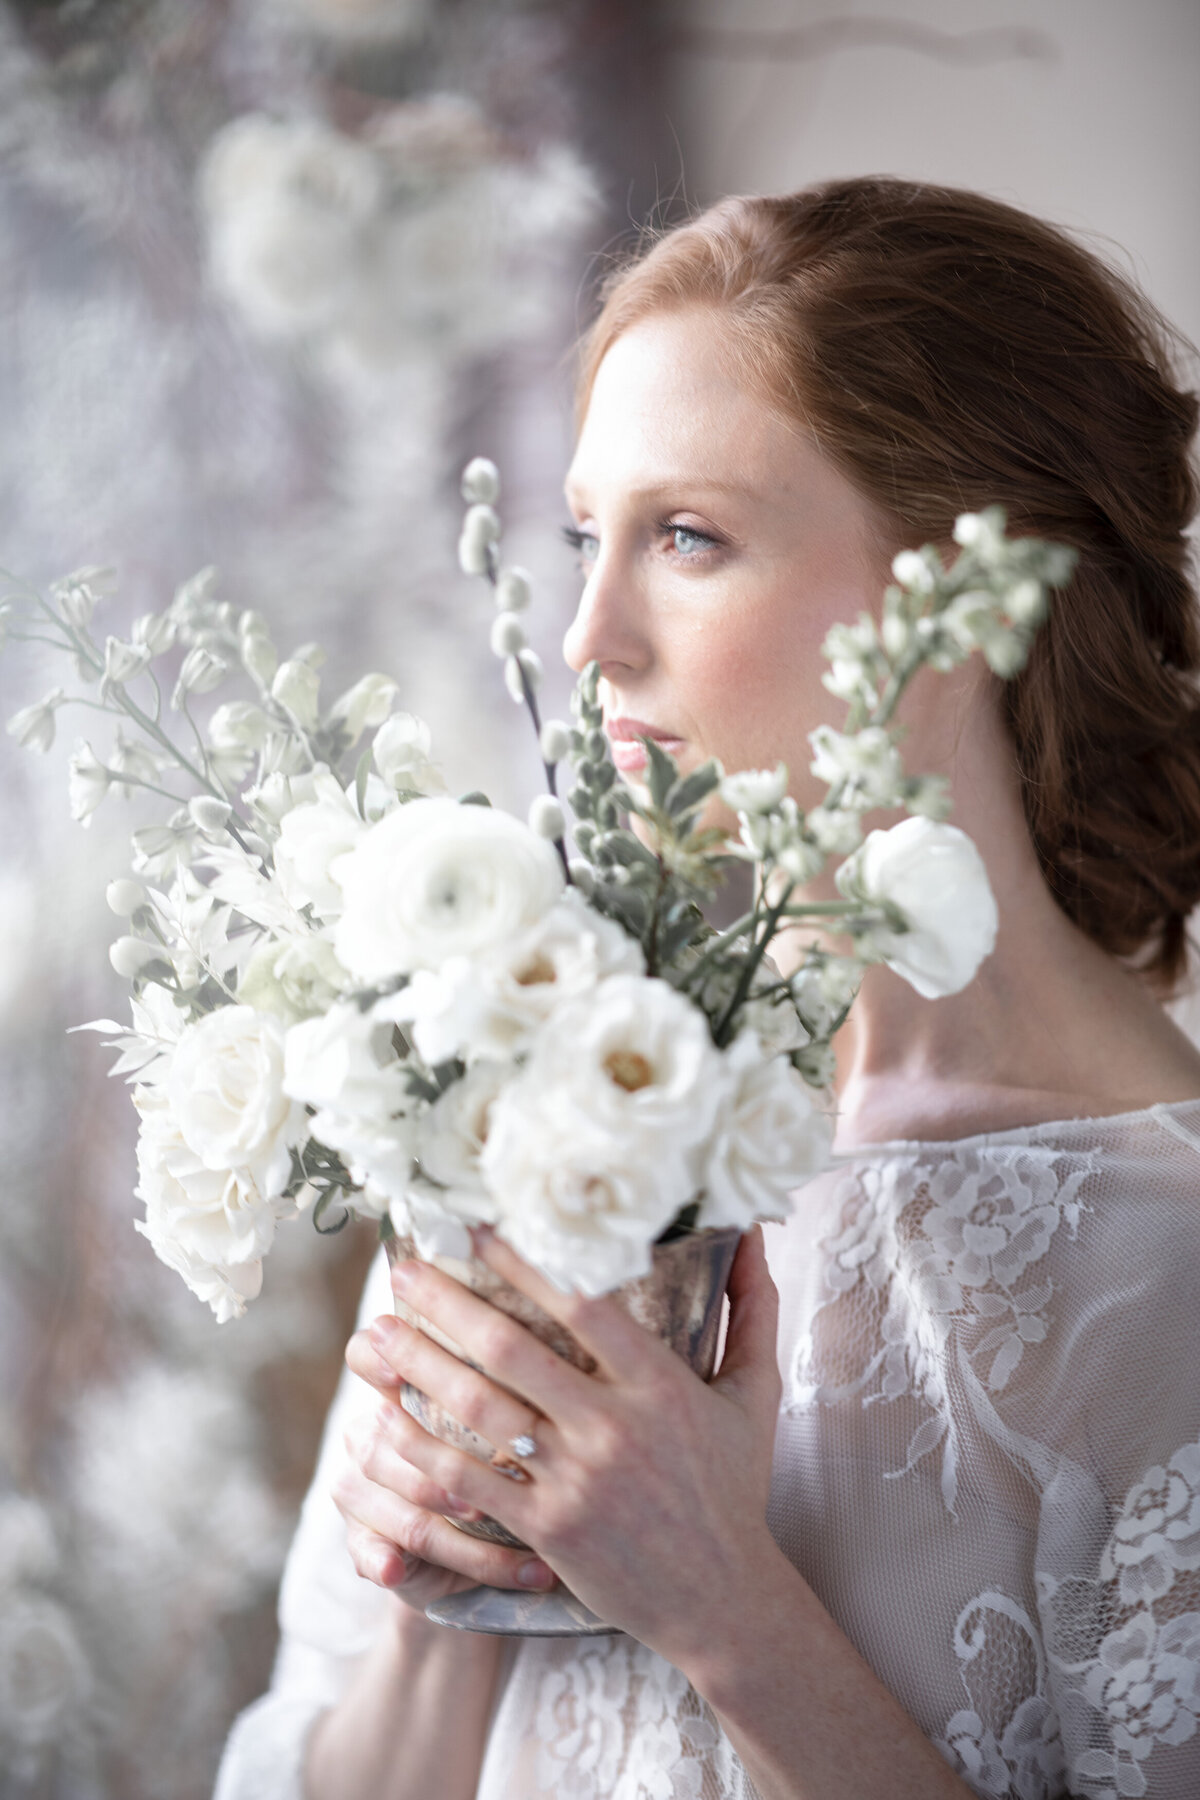 A bride with red hair holding a romantic white wedding flower arrangement